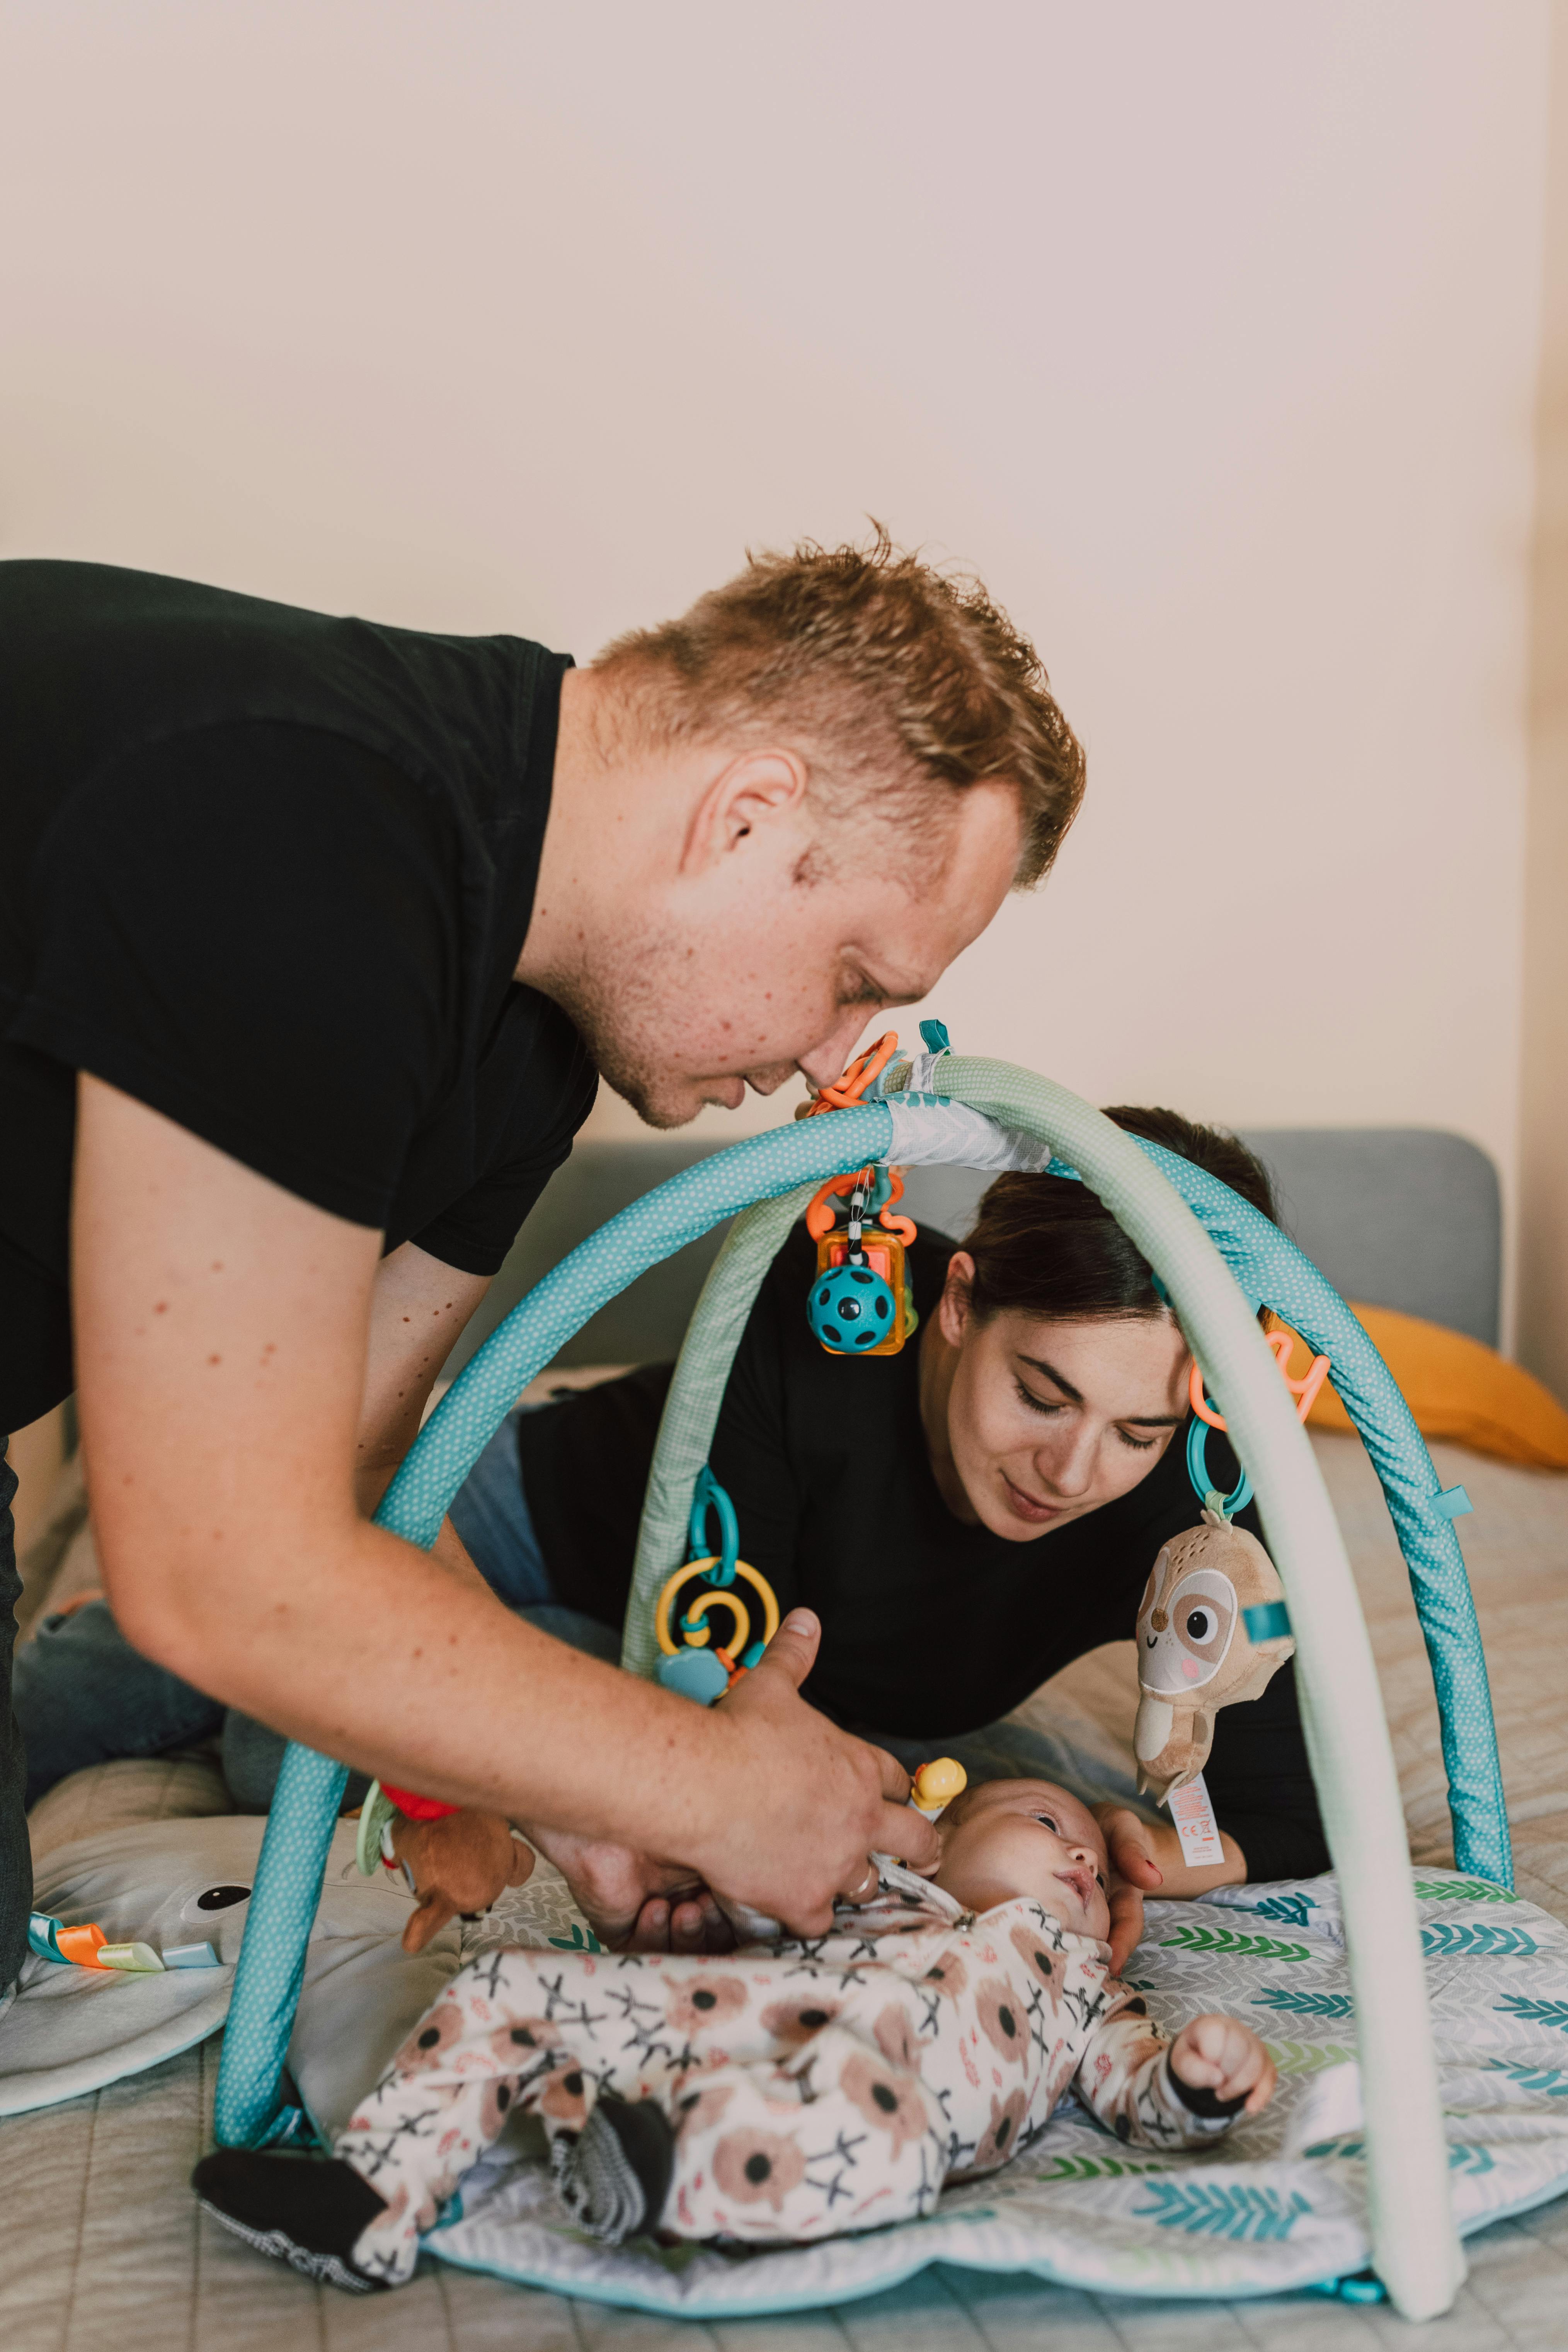 A couple taking care of their baby | Source: Pexels